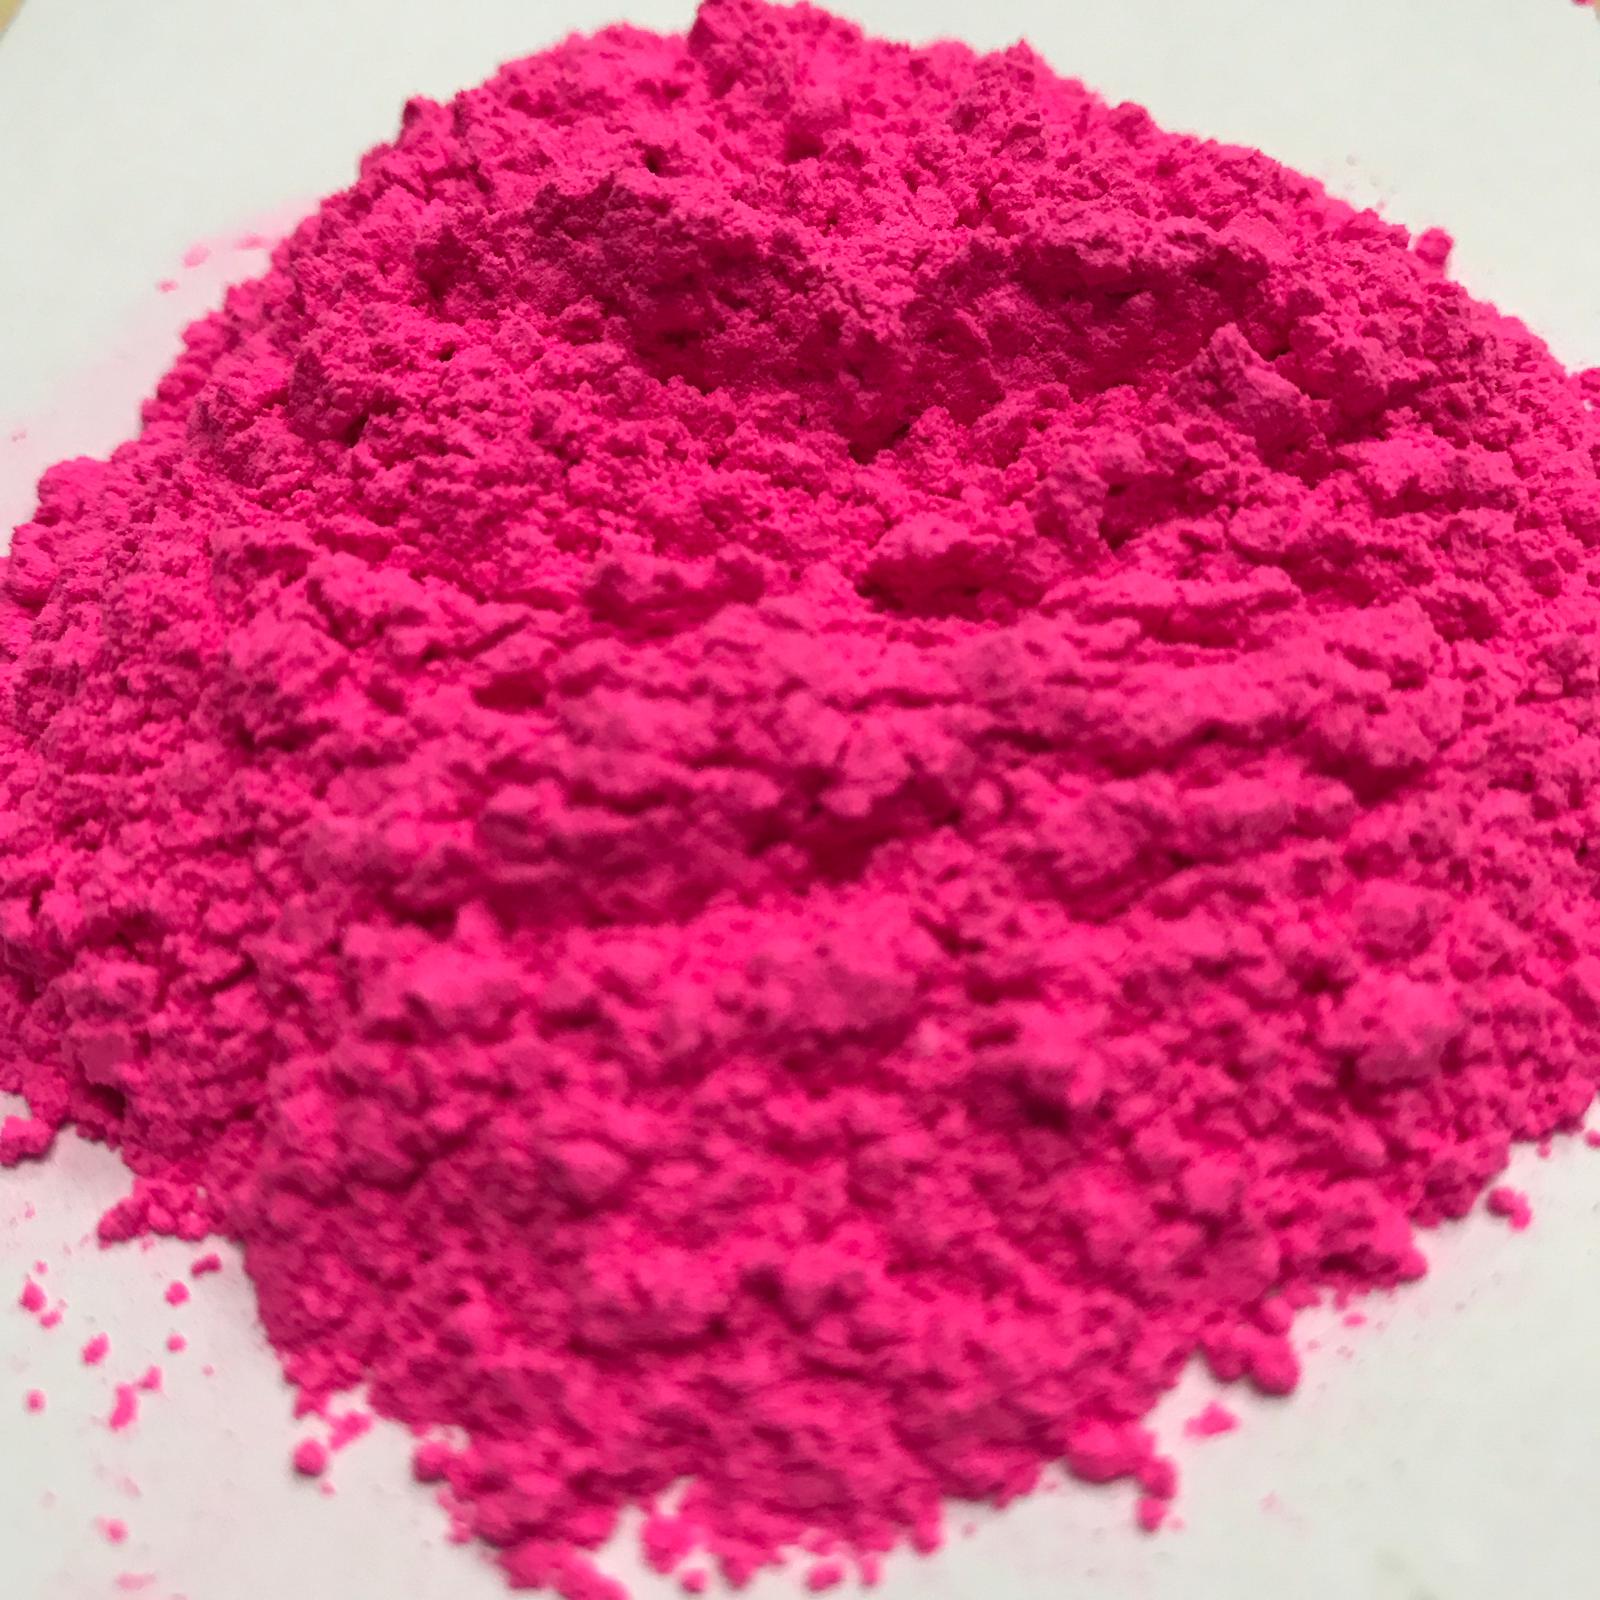 cosmetic grade pink holi color